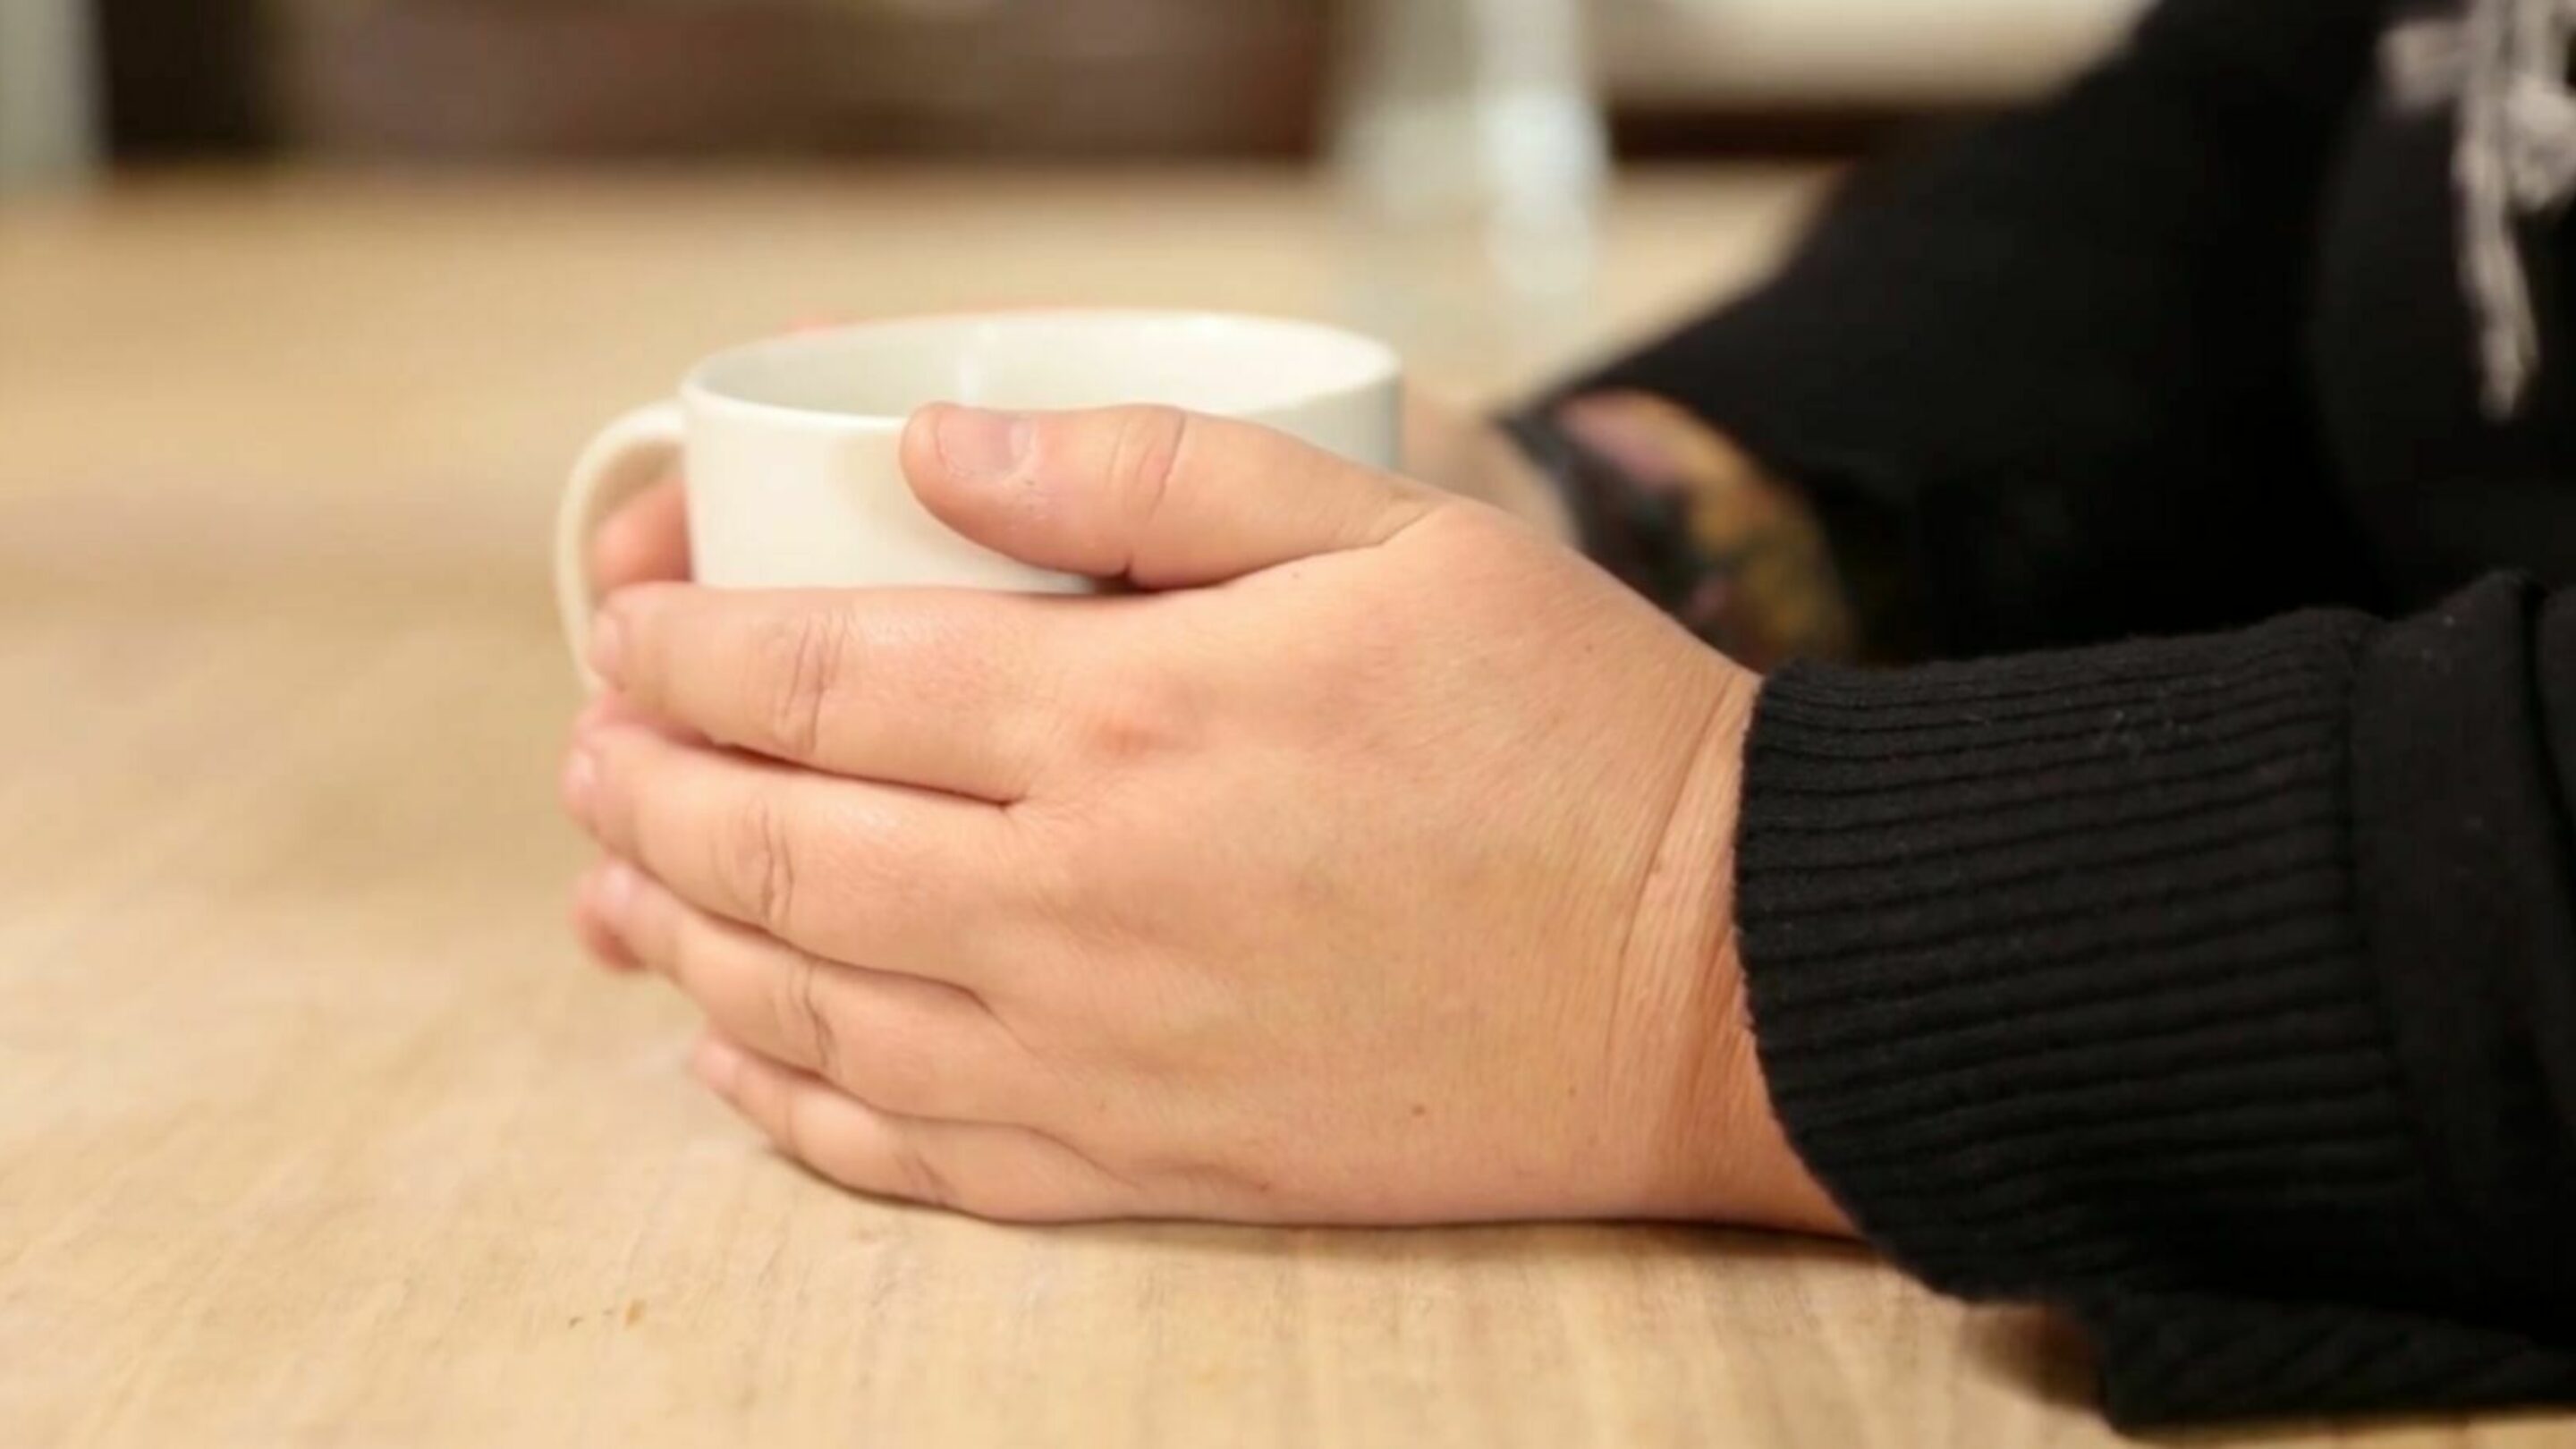 A person hands holding a mug, from the side